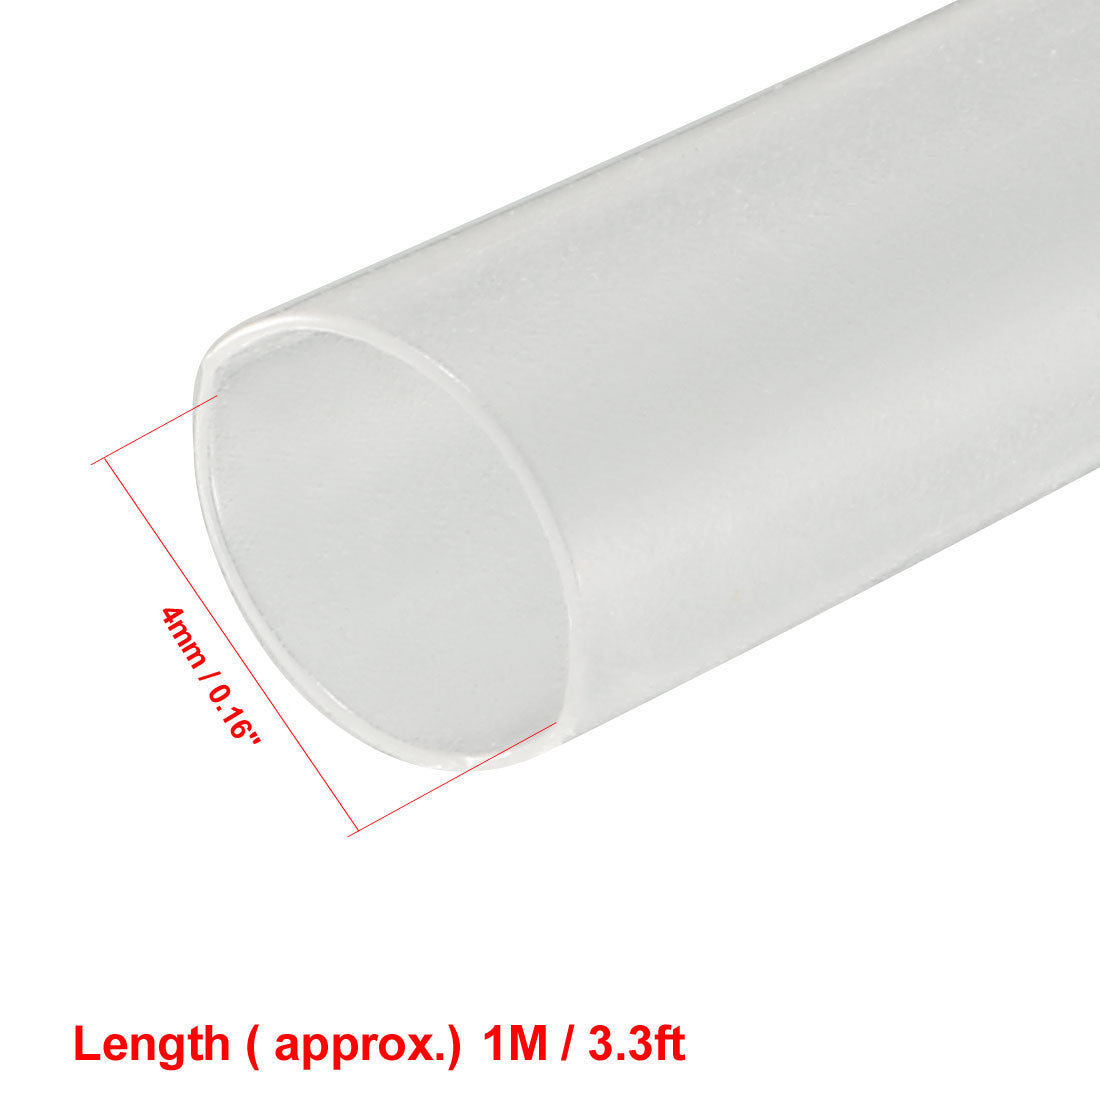 uxcell Uxcell Heat Shrink Tube 2:1 Electrical Insulation Tube Wire Cable Tubing Sleeving Wrap Clear 4mm Diameter 1m Long